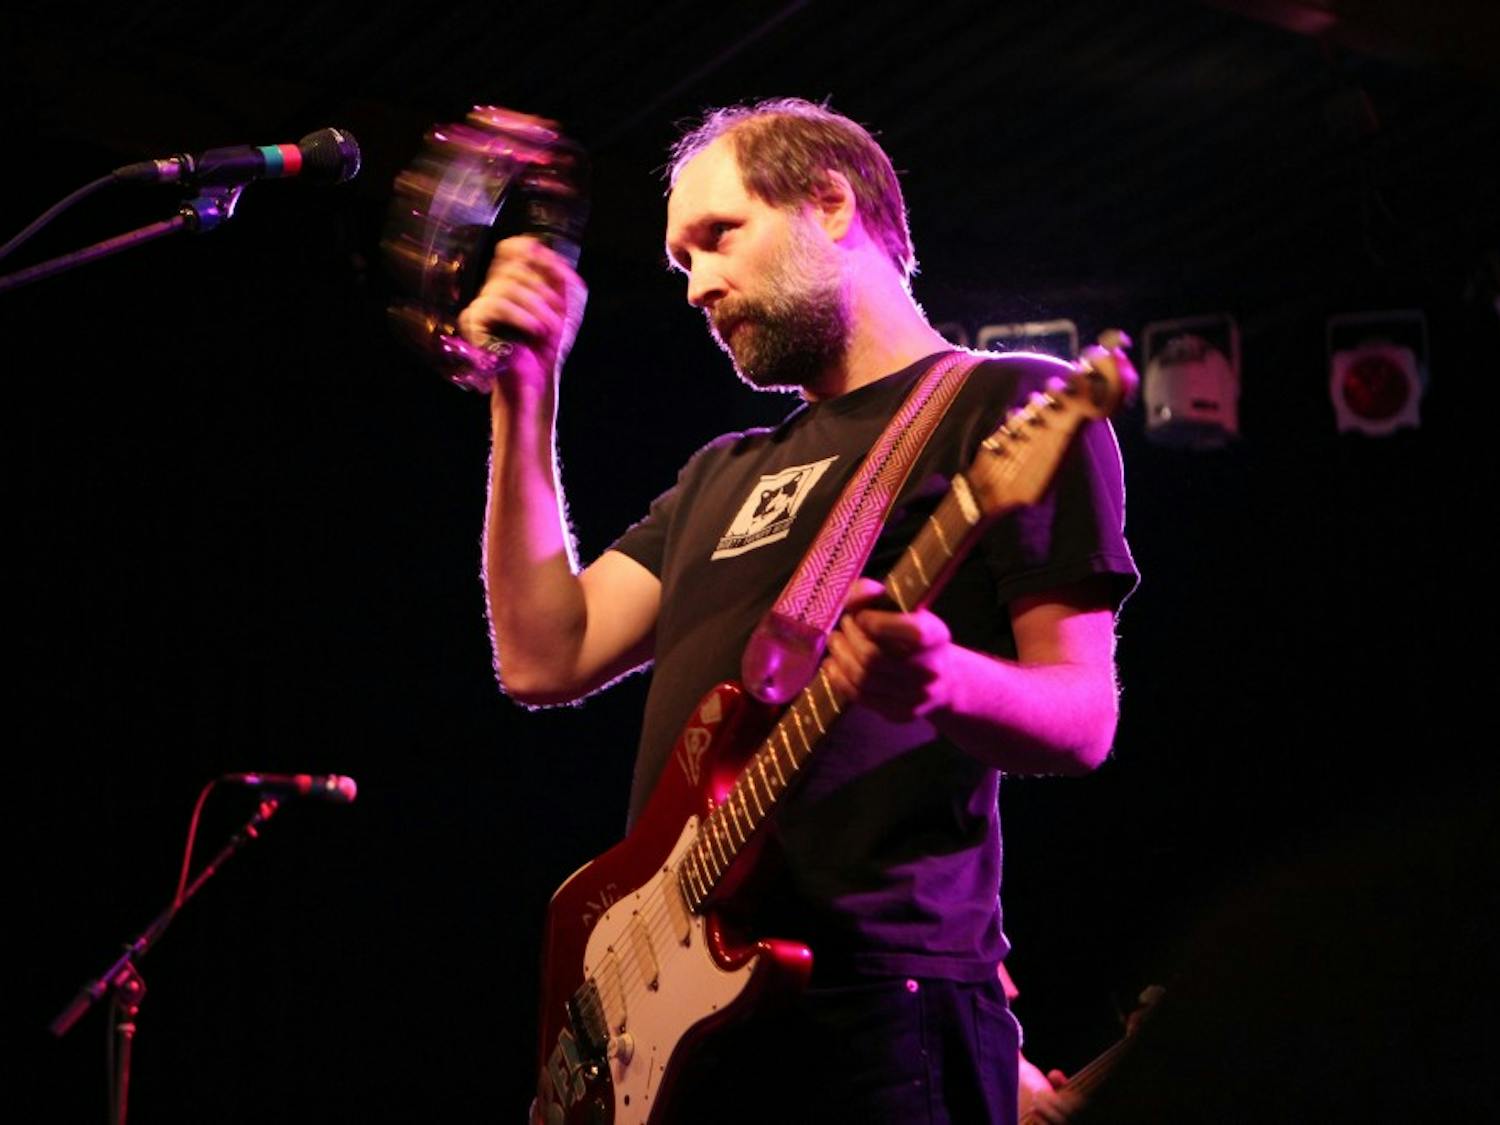 Built to Spill performs at Cat's Cradle in Carrboro on October 30, 2013.